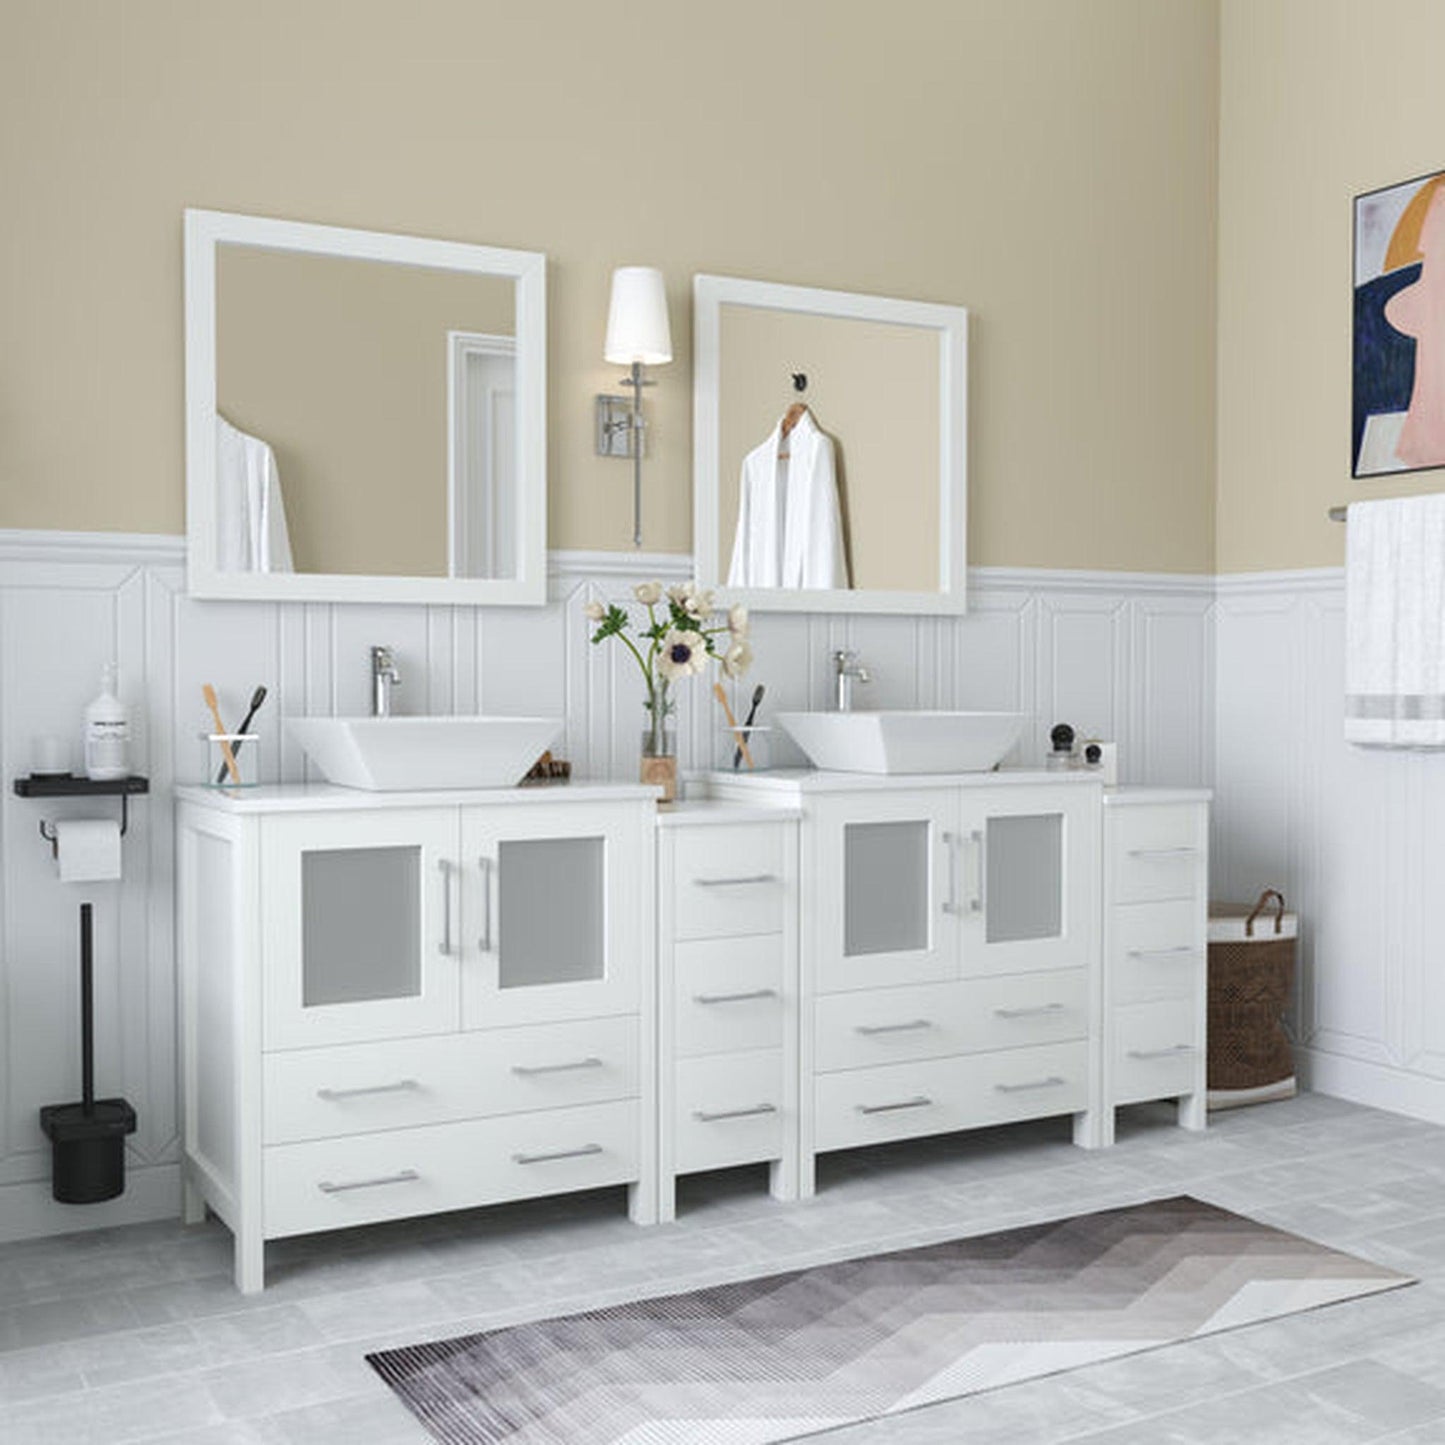 Vanity Art Ravenna 84" Double White Freestanding Vanity Set With White Engineered Marble Top, 2 Ceramic Vessel Sinks, 2 Side Cabinets and 2 Mirrors